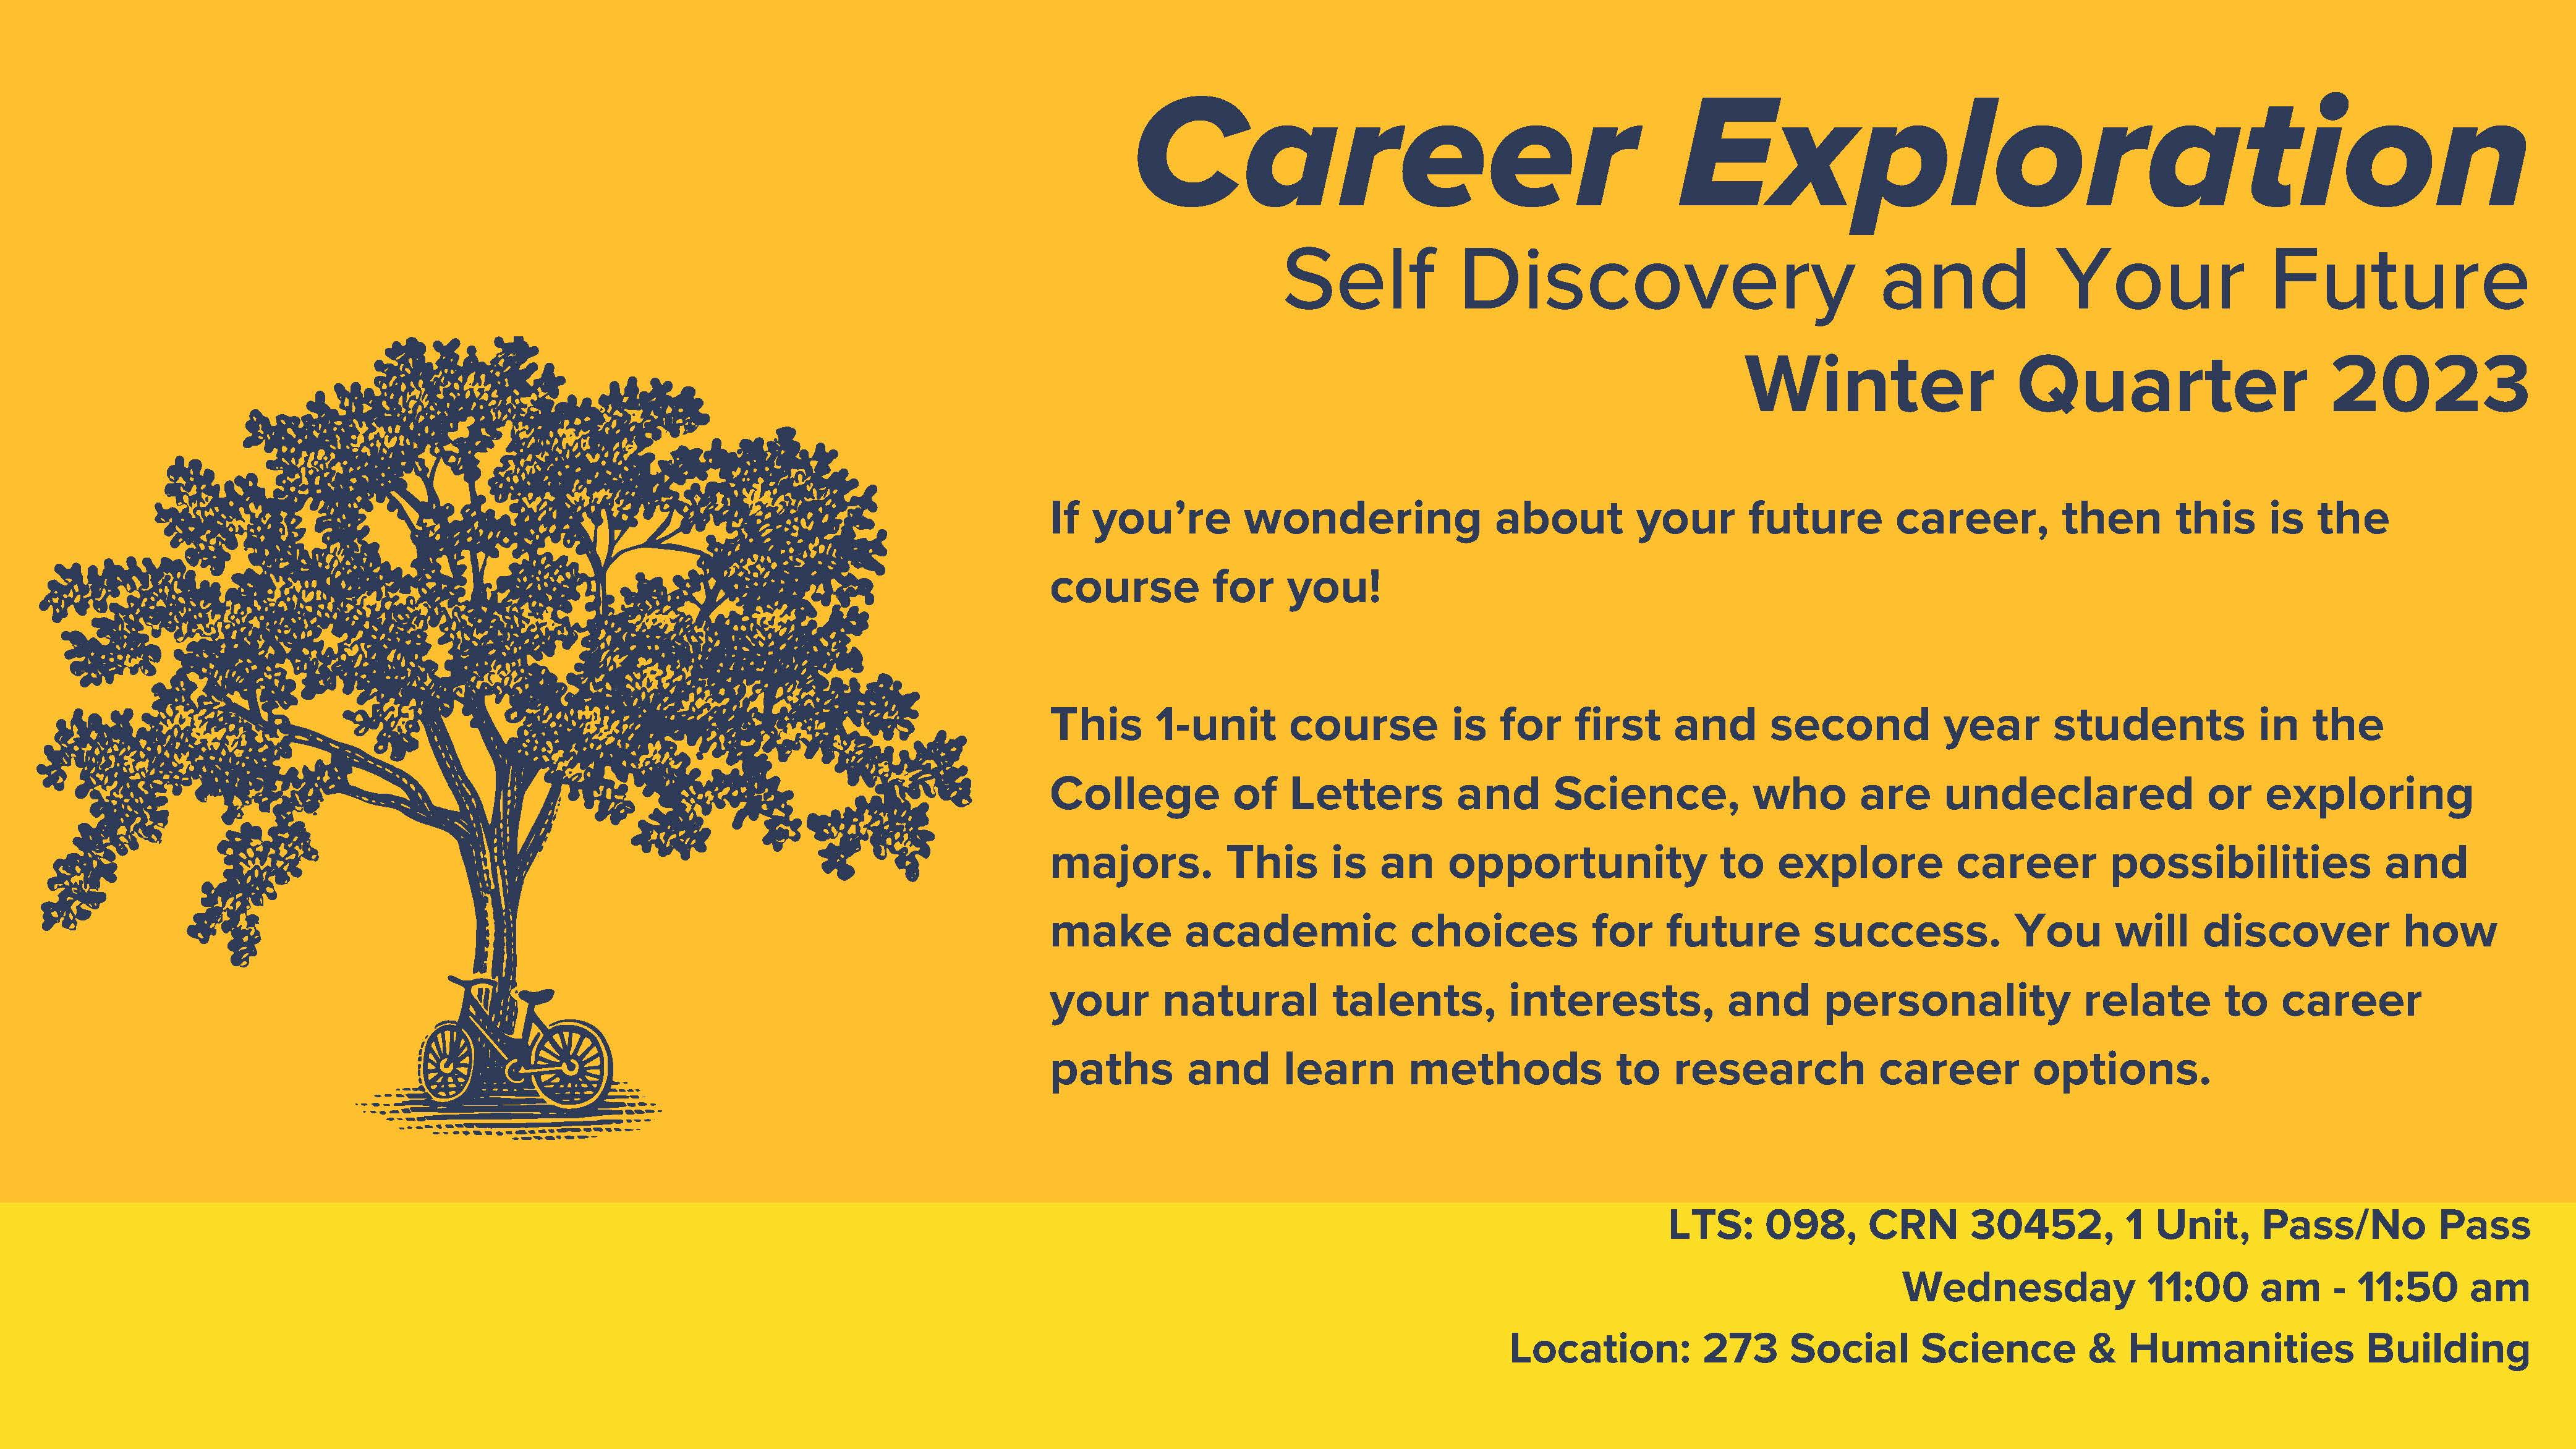 If you’re wondering about your future career, then this is the course for you! This 1-unit course is for first and second year students in the College of Letters and Science, who are undeclared or exploring majors. This is an opportunity to explore career possibilities and make academic choices for future success. You will discover how your natural talents, interests, and personality relate to career paths and learn methods to research career options. CRN 30452